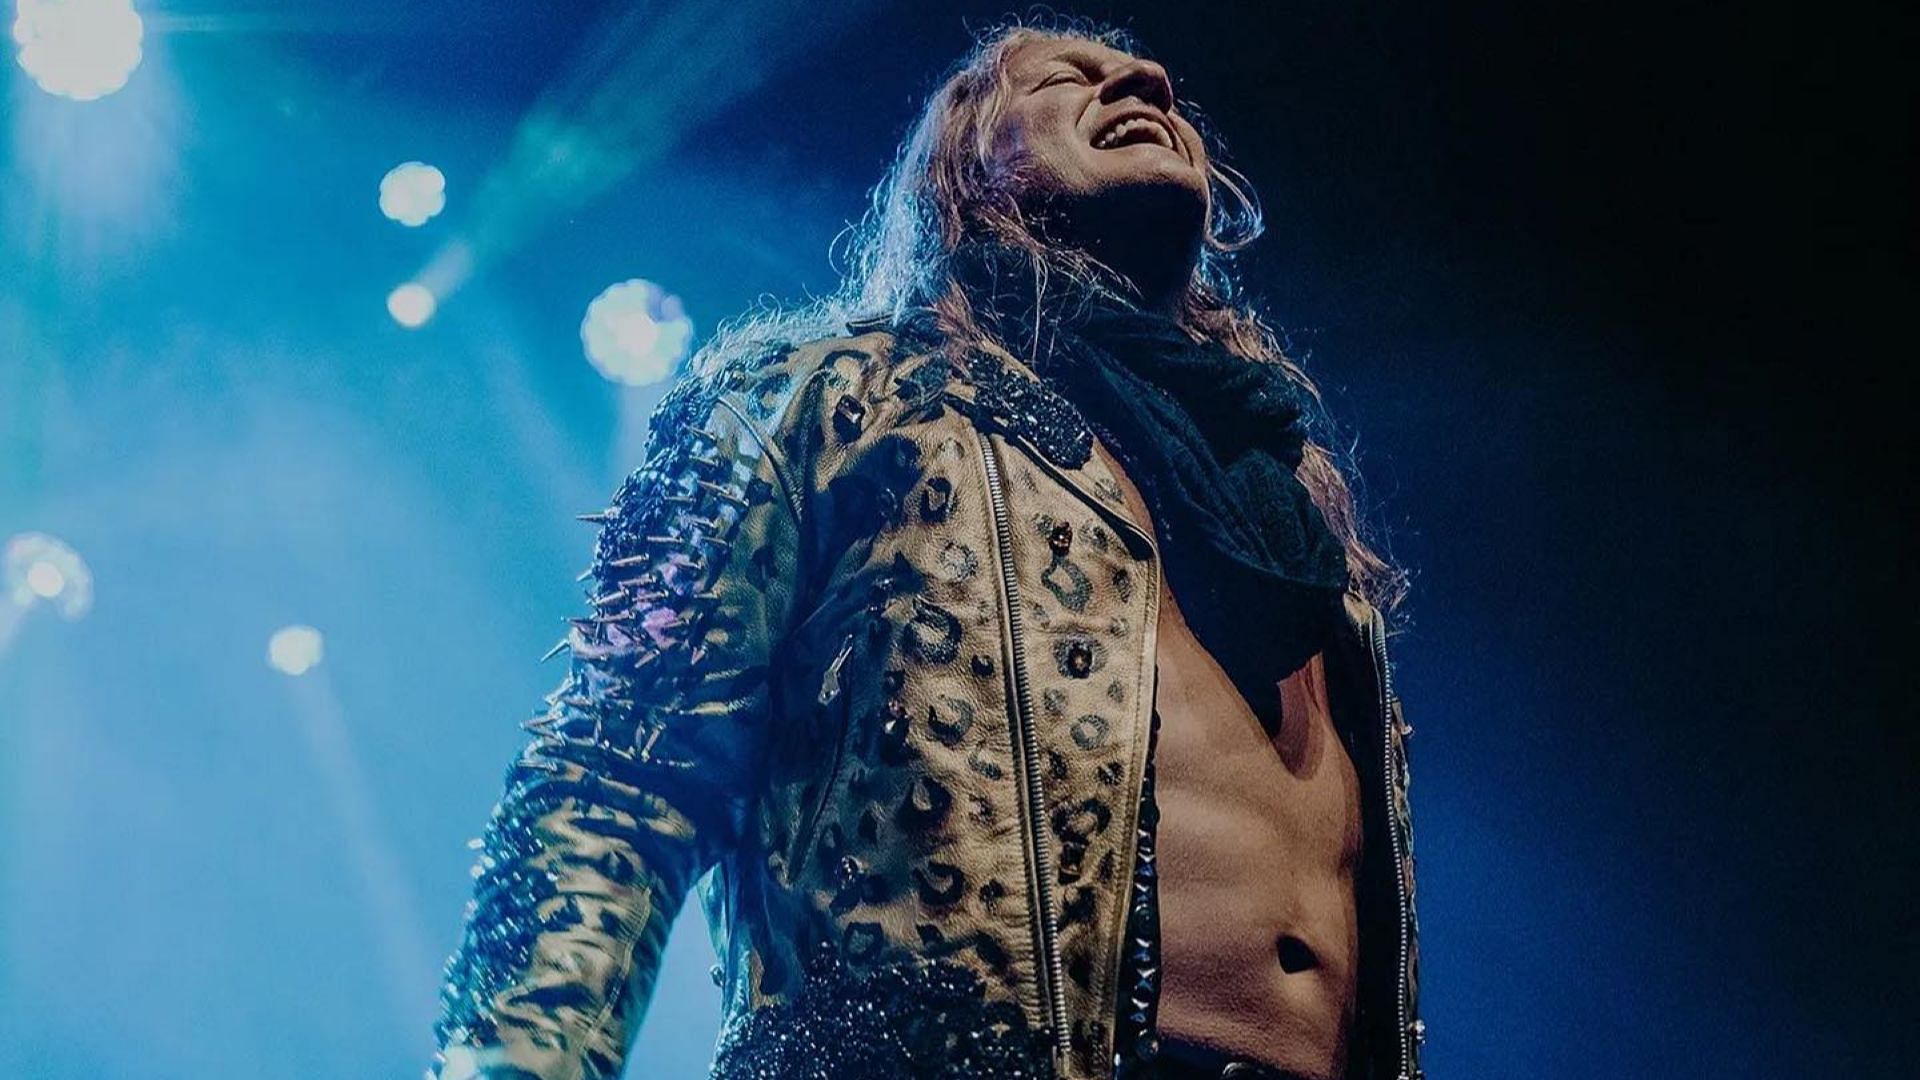 Chris Jericho performs with his band Fozzy during AEW All In Weekend